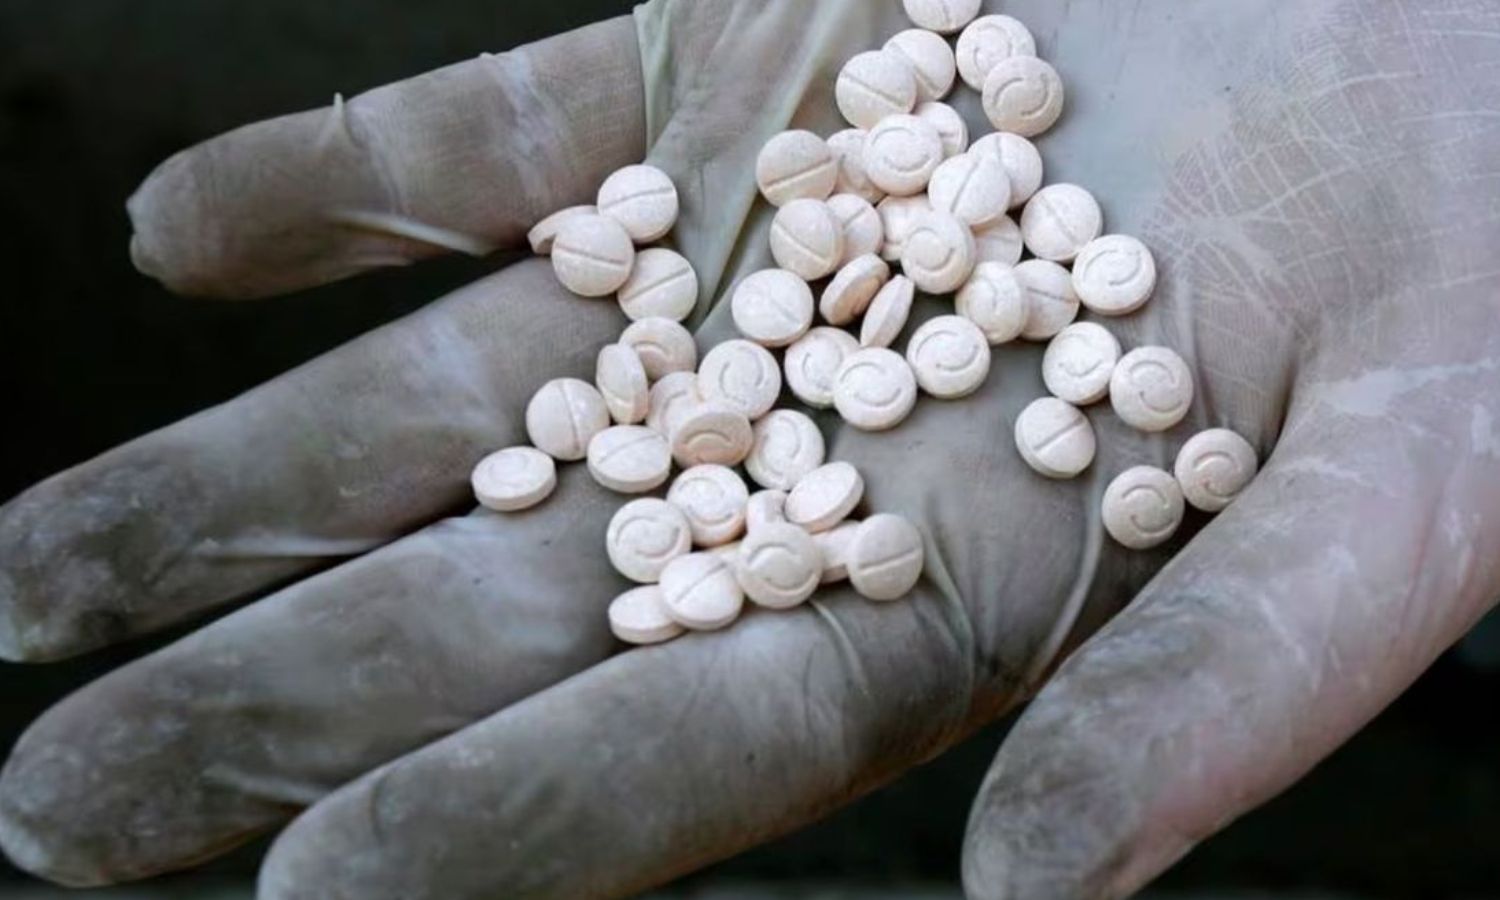 In December 2022, the United States enacted a law to combat drugs managed by the Syrian regime, aimed at disrupting and dismantling drug production networks associated with the regime's president, Bashar al-Assad. However, the data on the ground do not reflect the desired outcomes of the law - 2007 (Reuters)